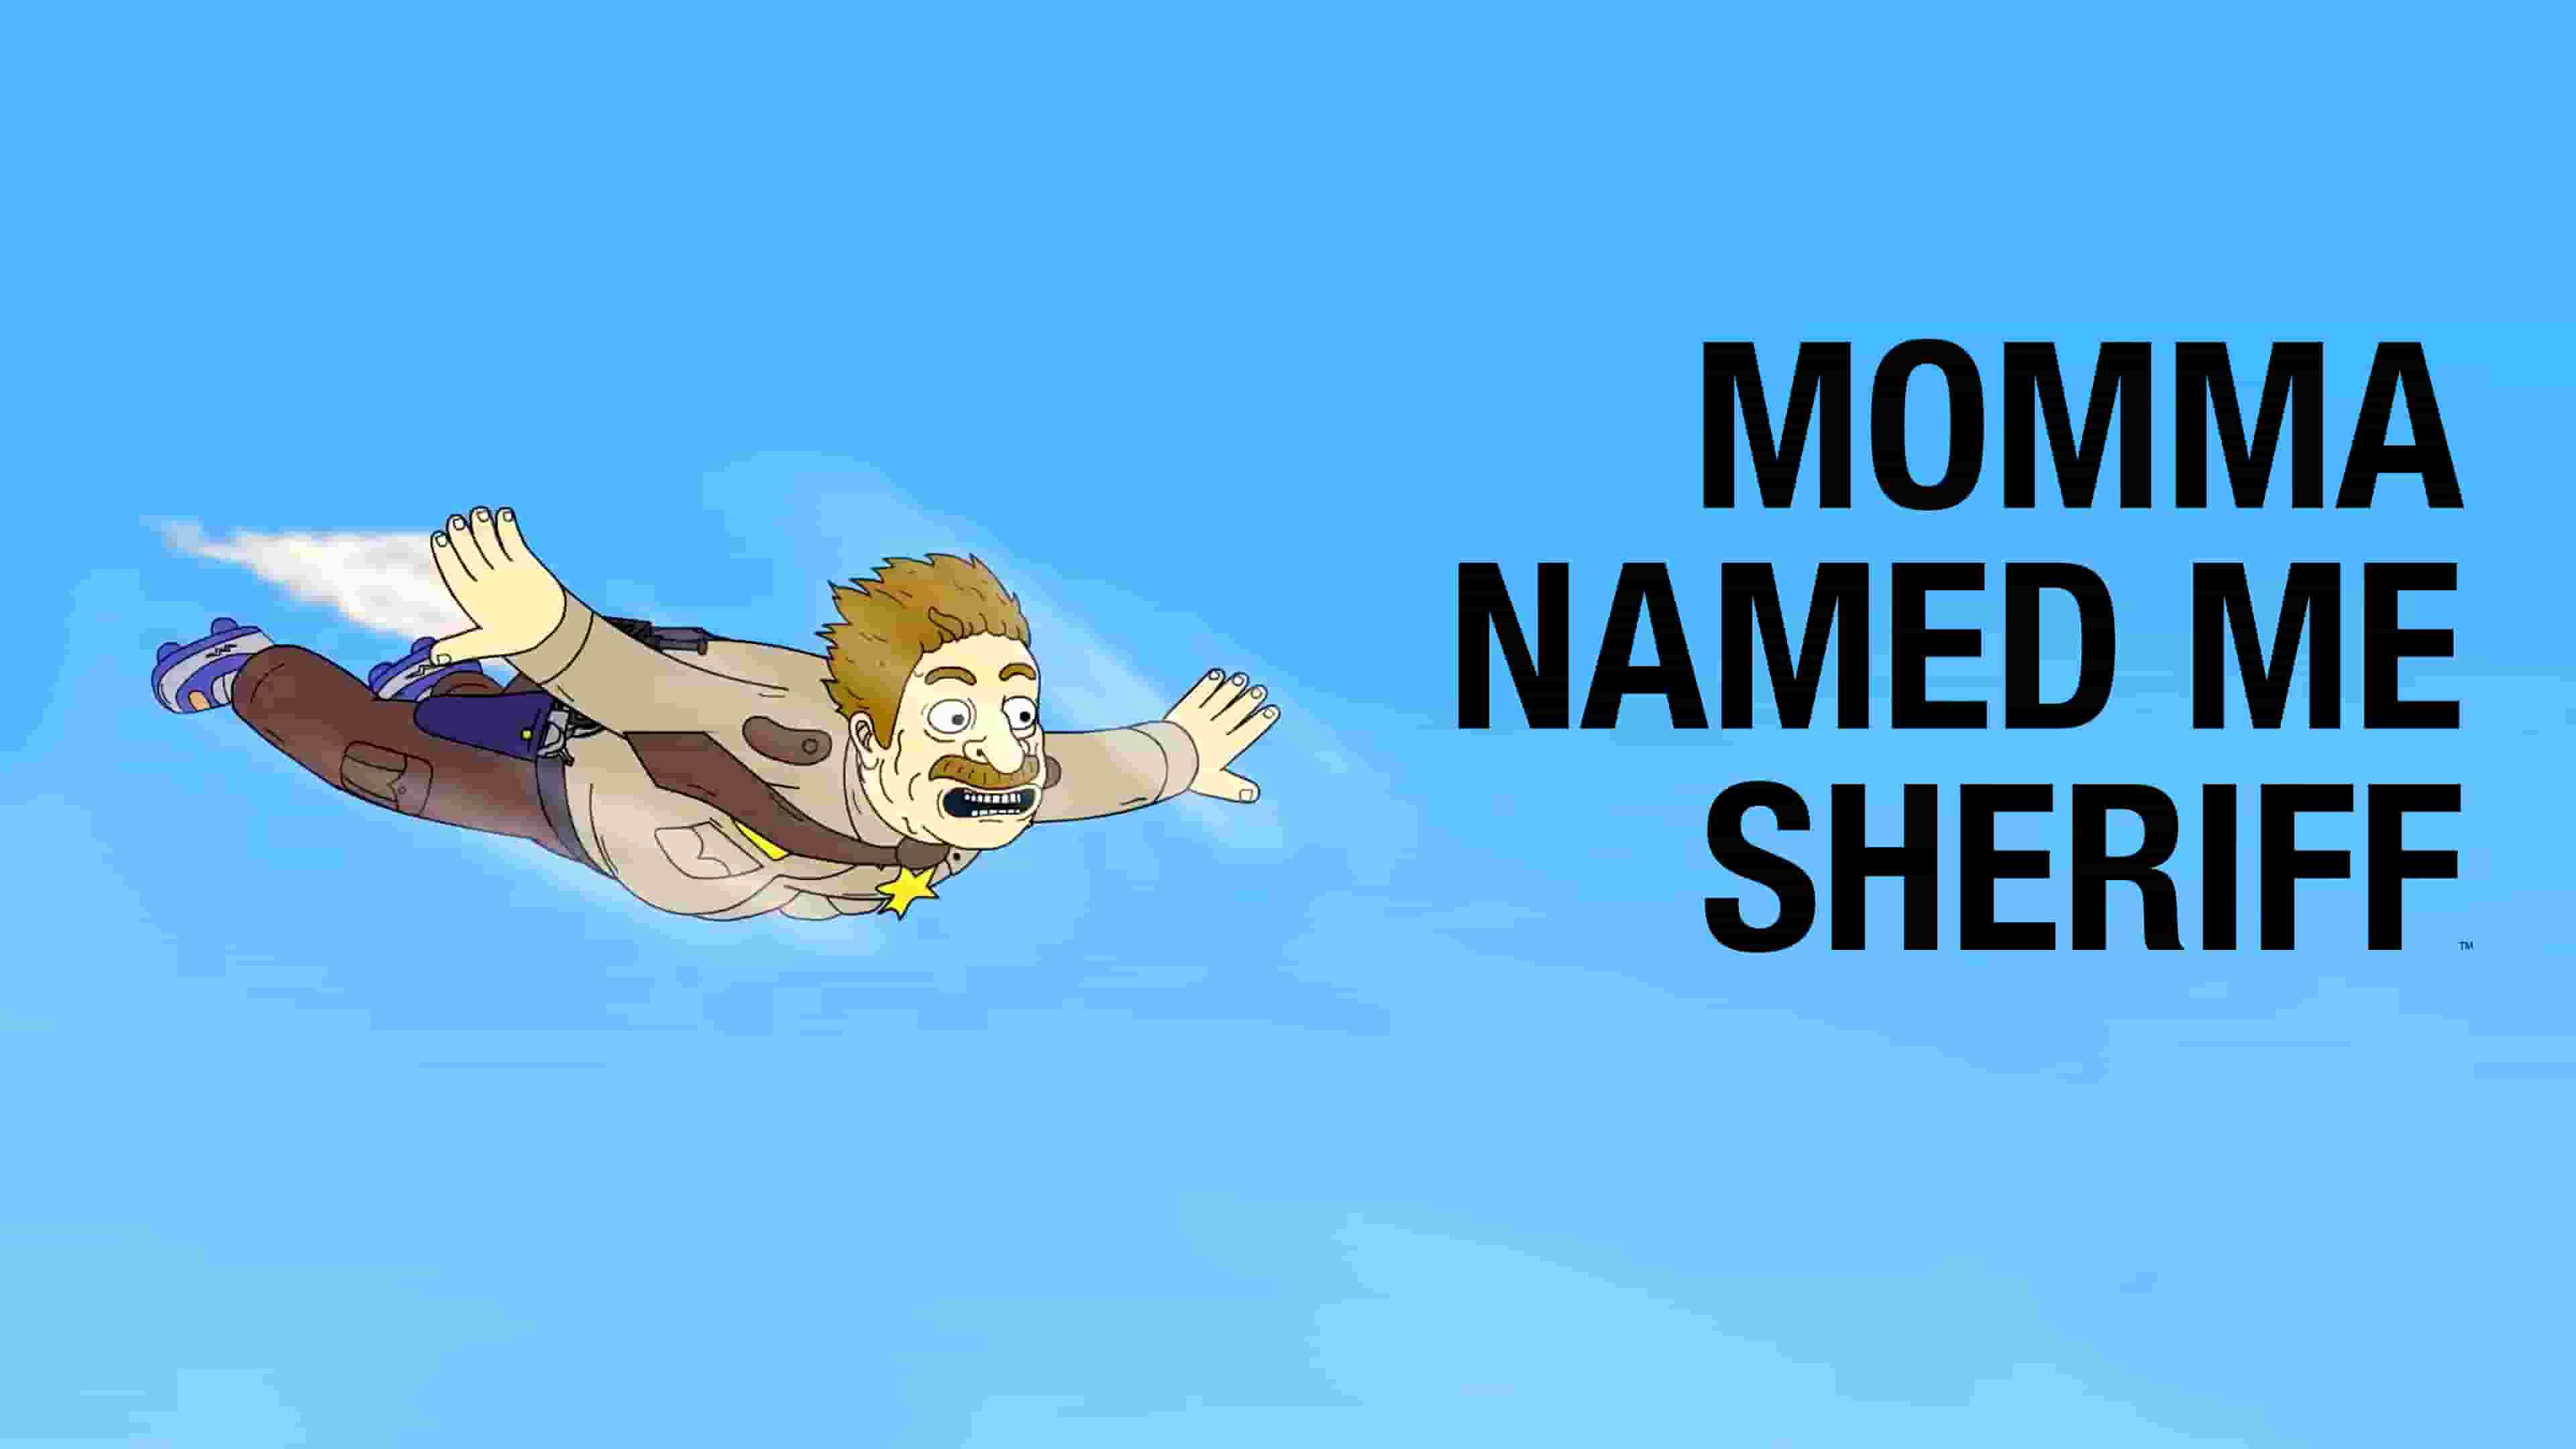 Title art for Adult Swim show Momma Named Me Sheriff